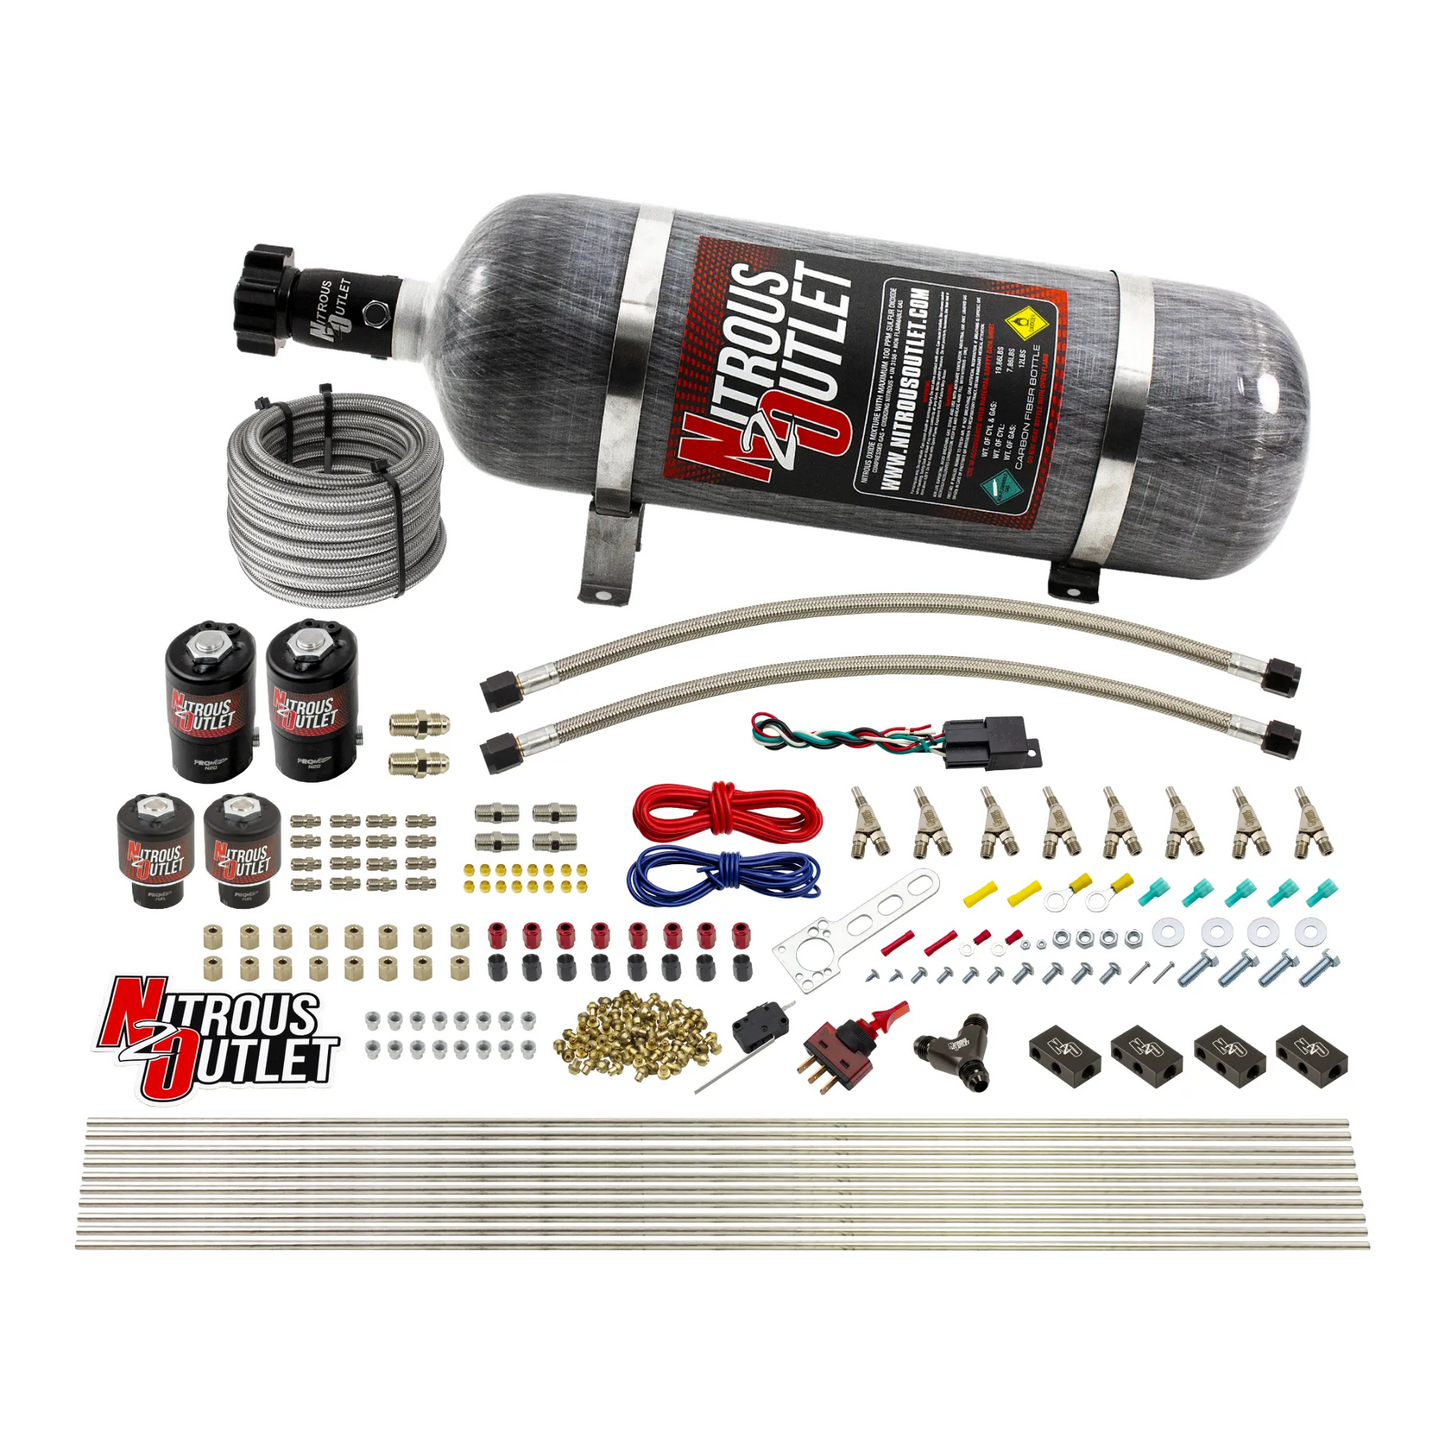 8 Cylinder Single Stage Direct Port Nitrous System - .122 Nitrous/.177 Fuel Solenoids - Straight Blow Through Nozzles